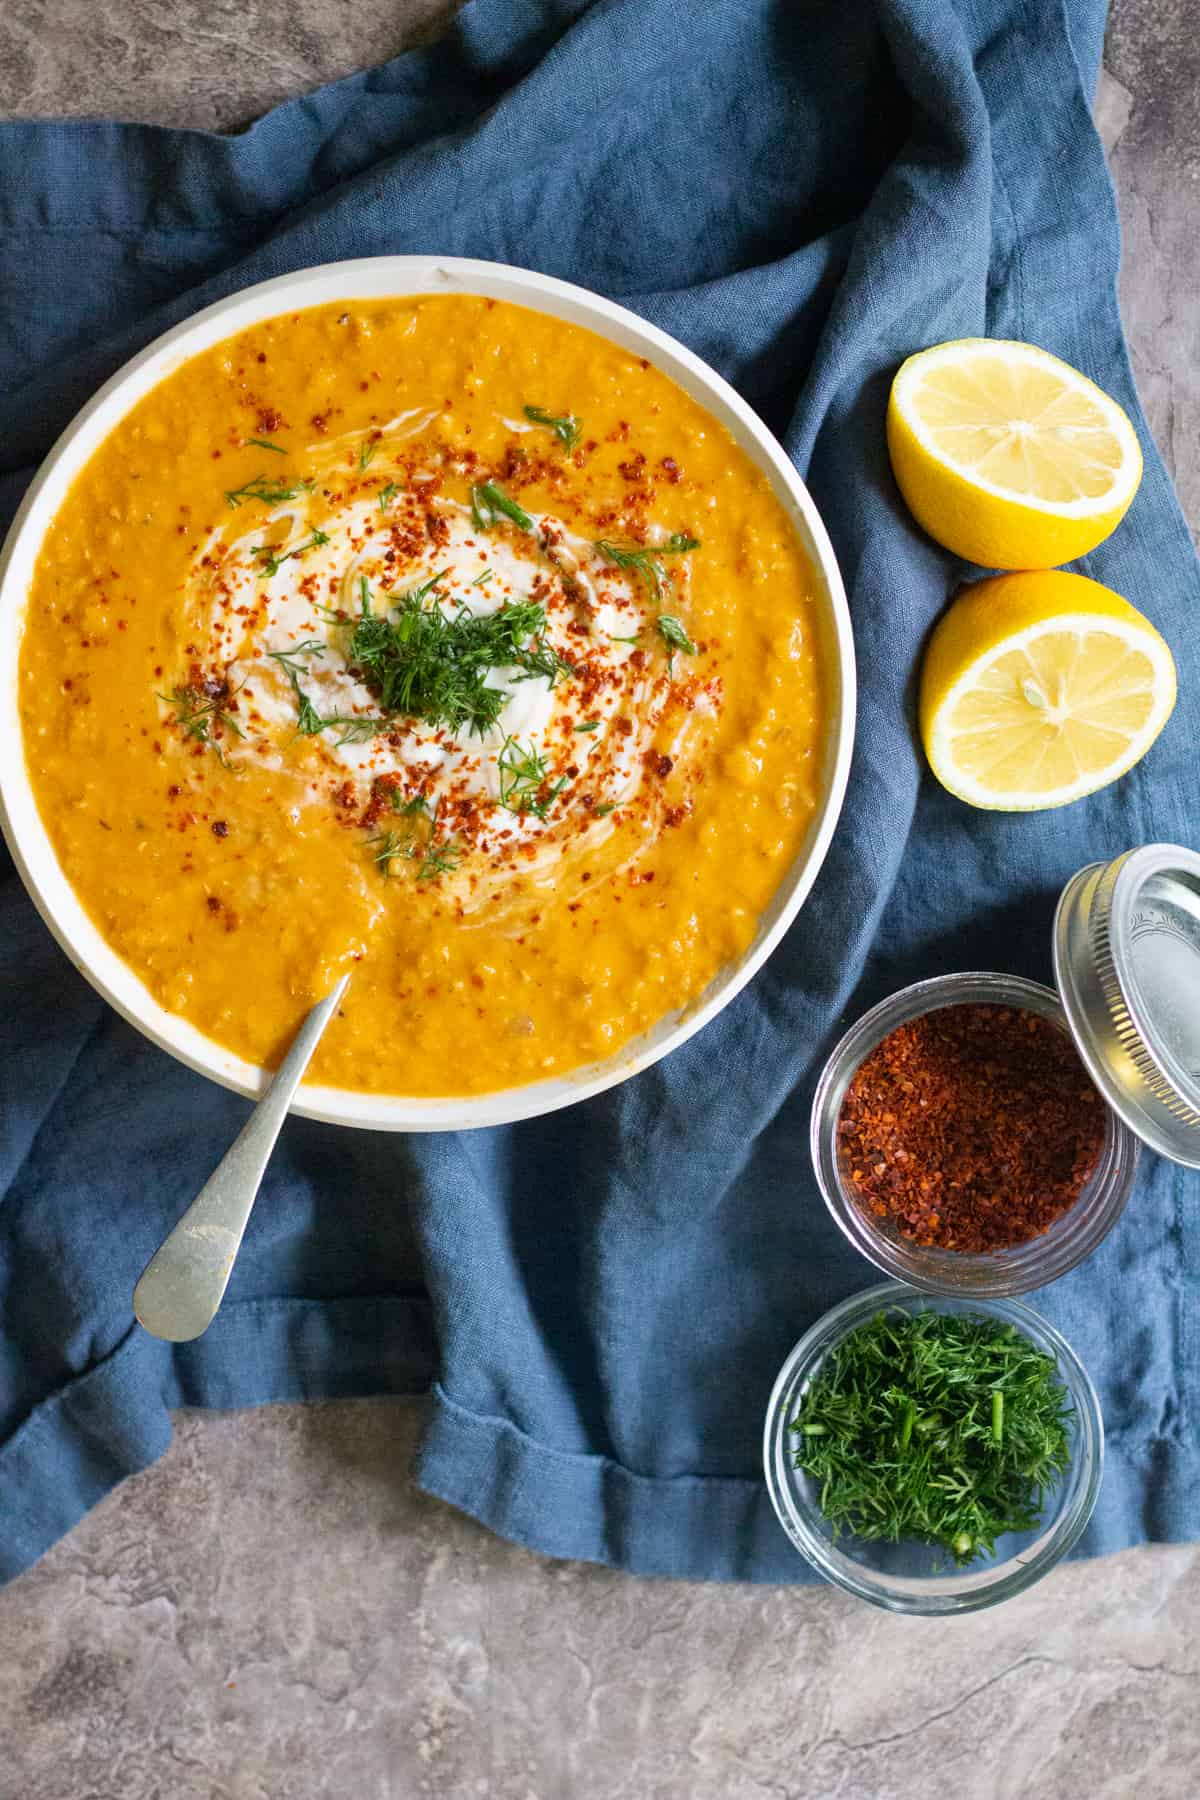 easy healthy dinner ideas - Curry lentil soup is an easy soup recipe that you can make in 30 minutes with just a few ingredients. This lentil soup with coconut milk is very comforting. 